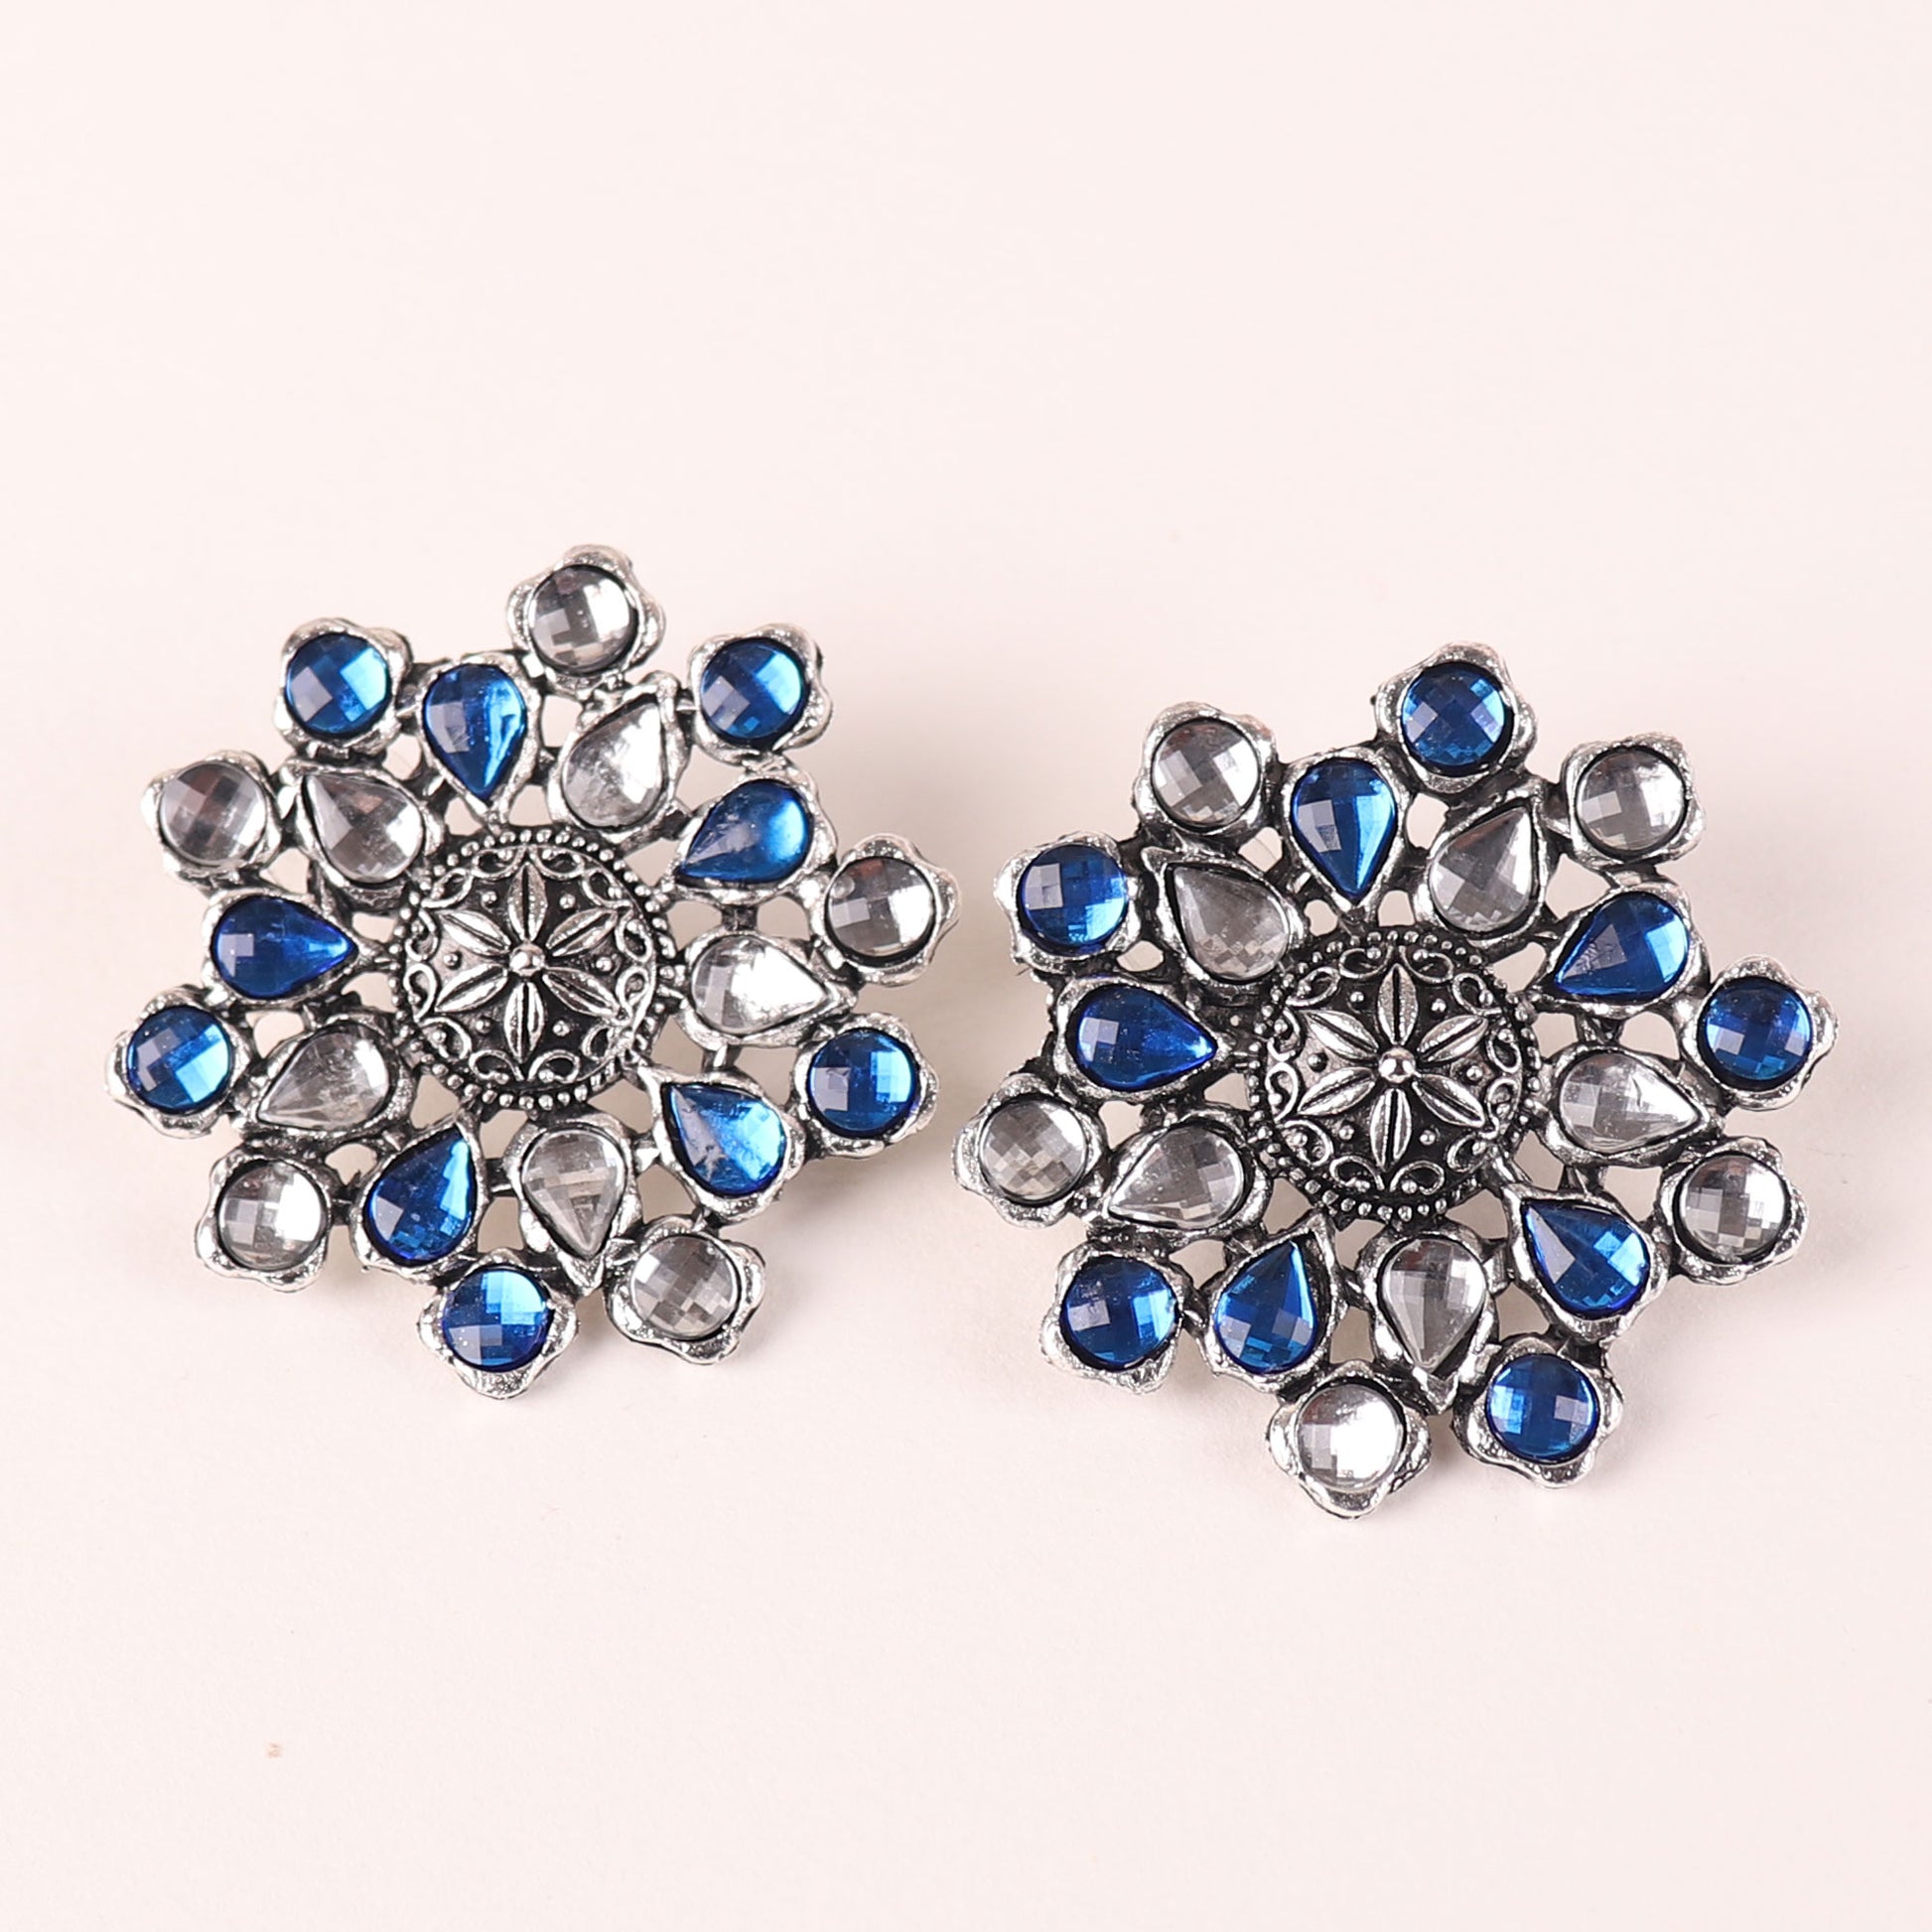 Earrings,The Pearl Hive Studs in Blue - Cippele Multi Store